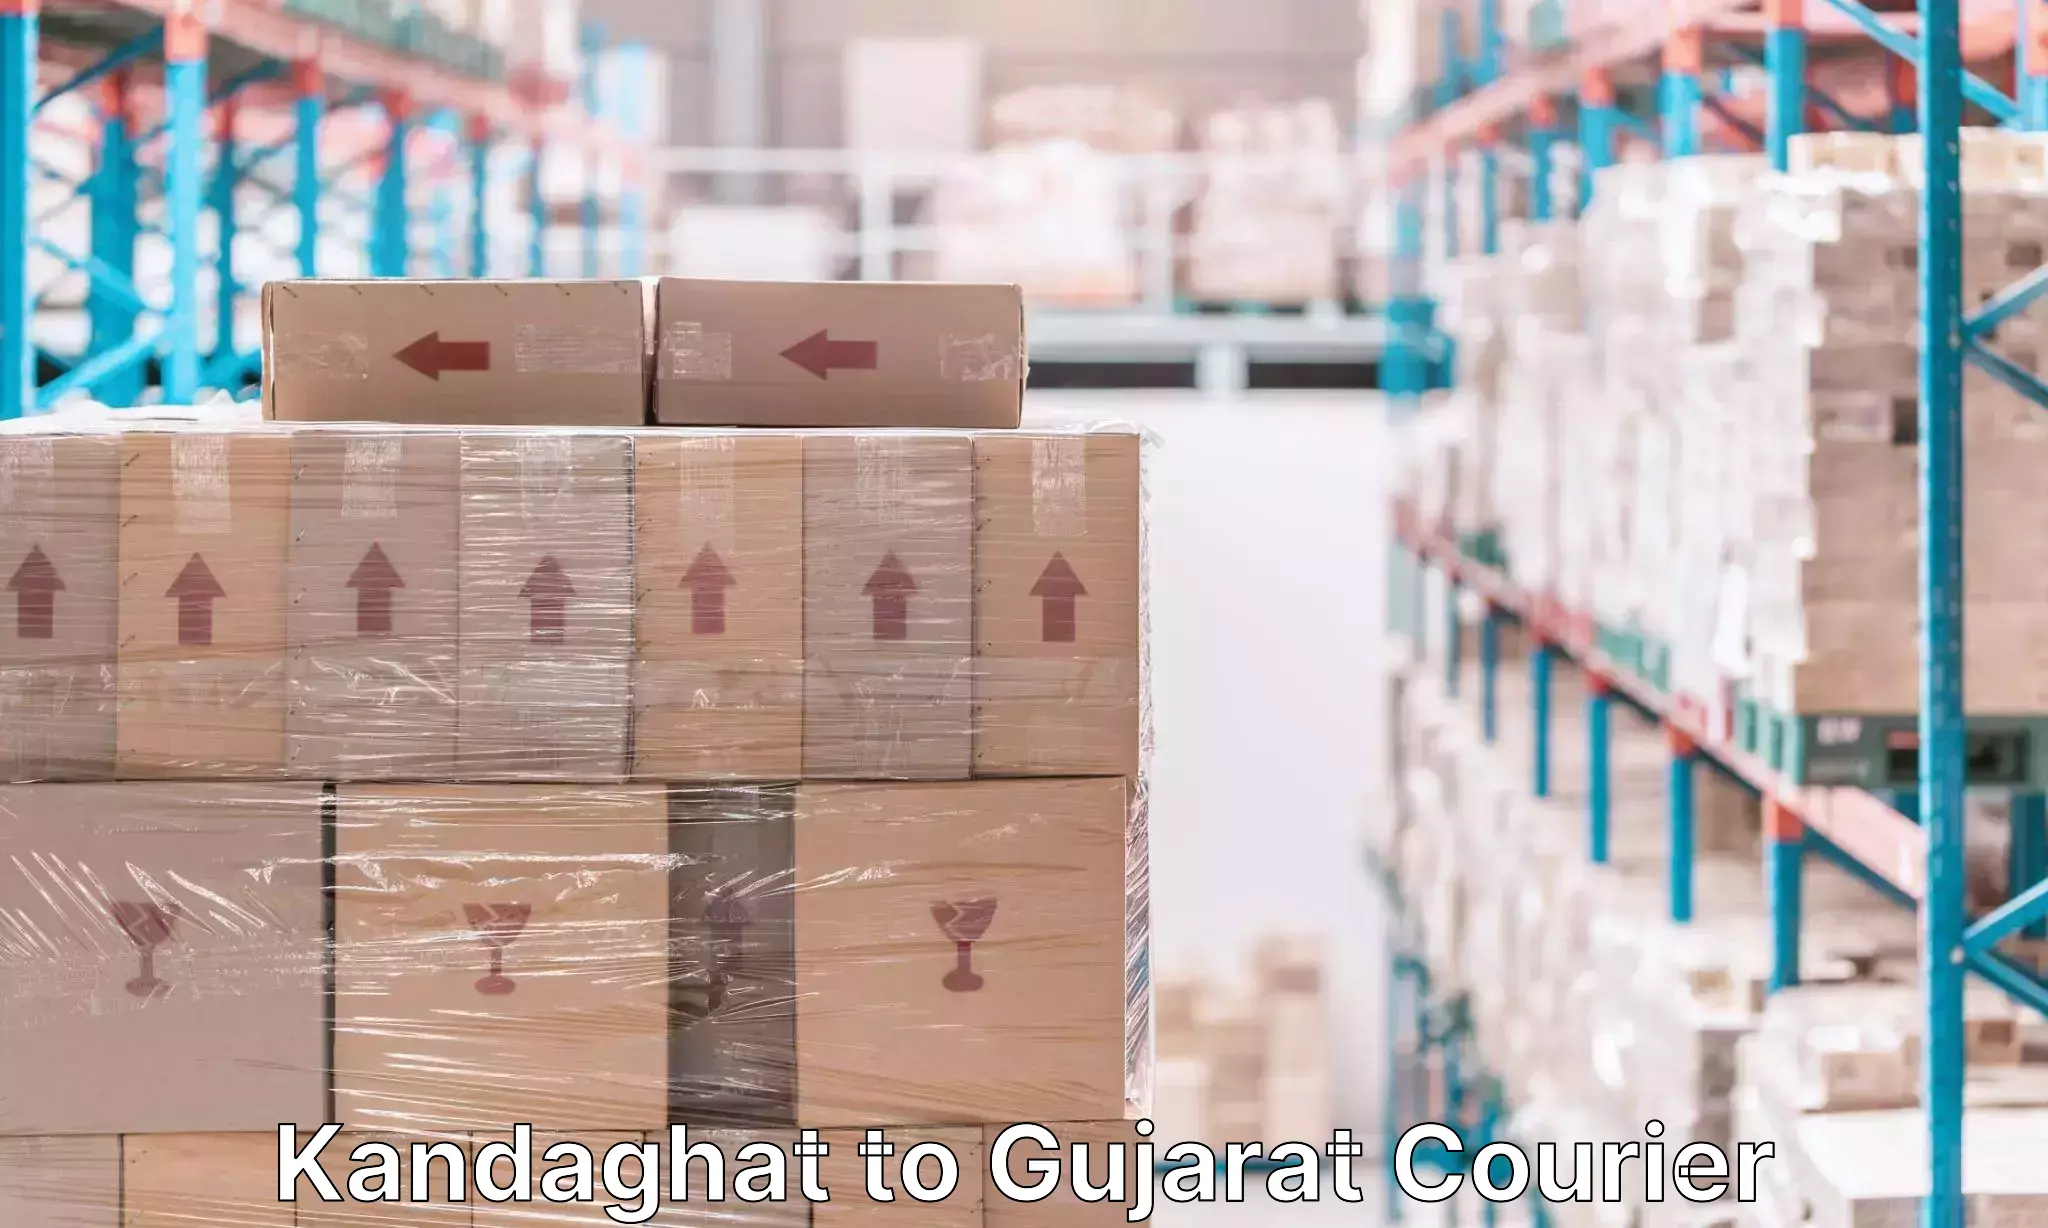 Online luggage shipping booking Kandaghat to Ahmedabad